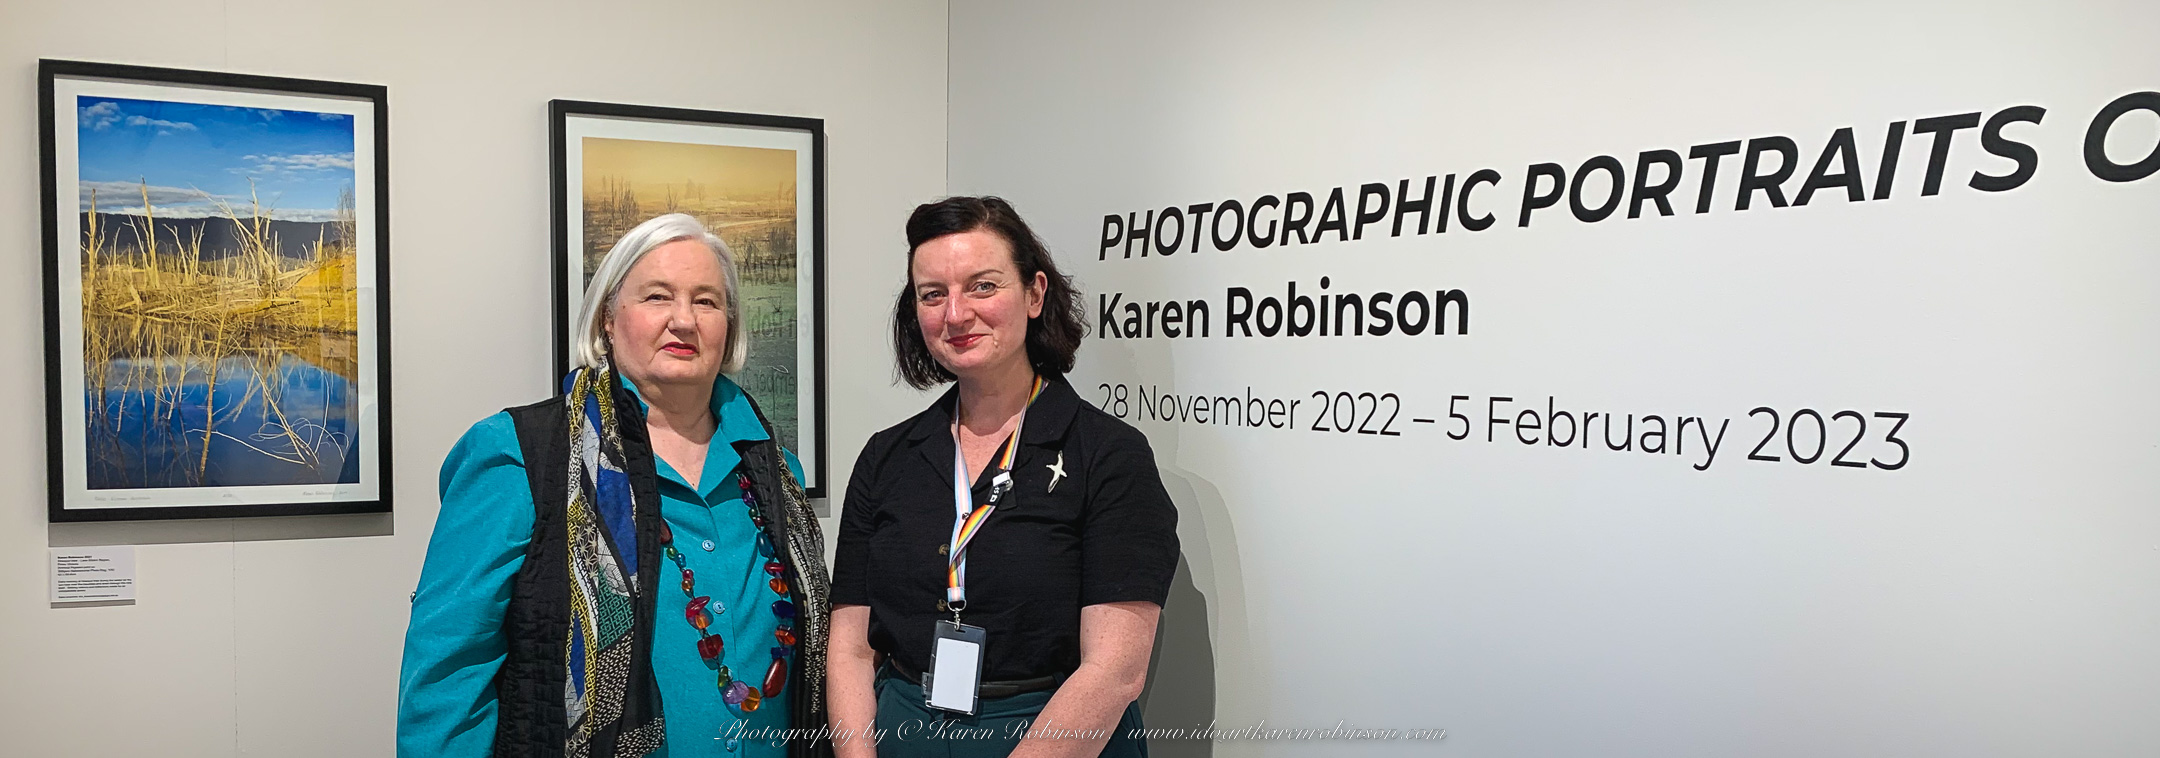 Photography 2022 – Solo Exhibition: “LAUNCH NIGHT – Photographic
Portraits of Nature by Karen Robinson”